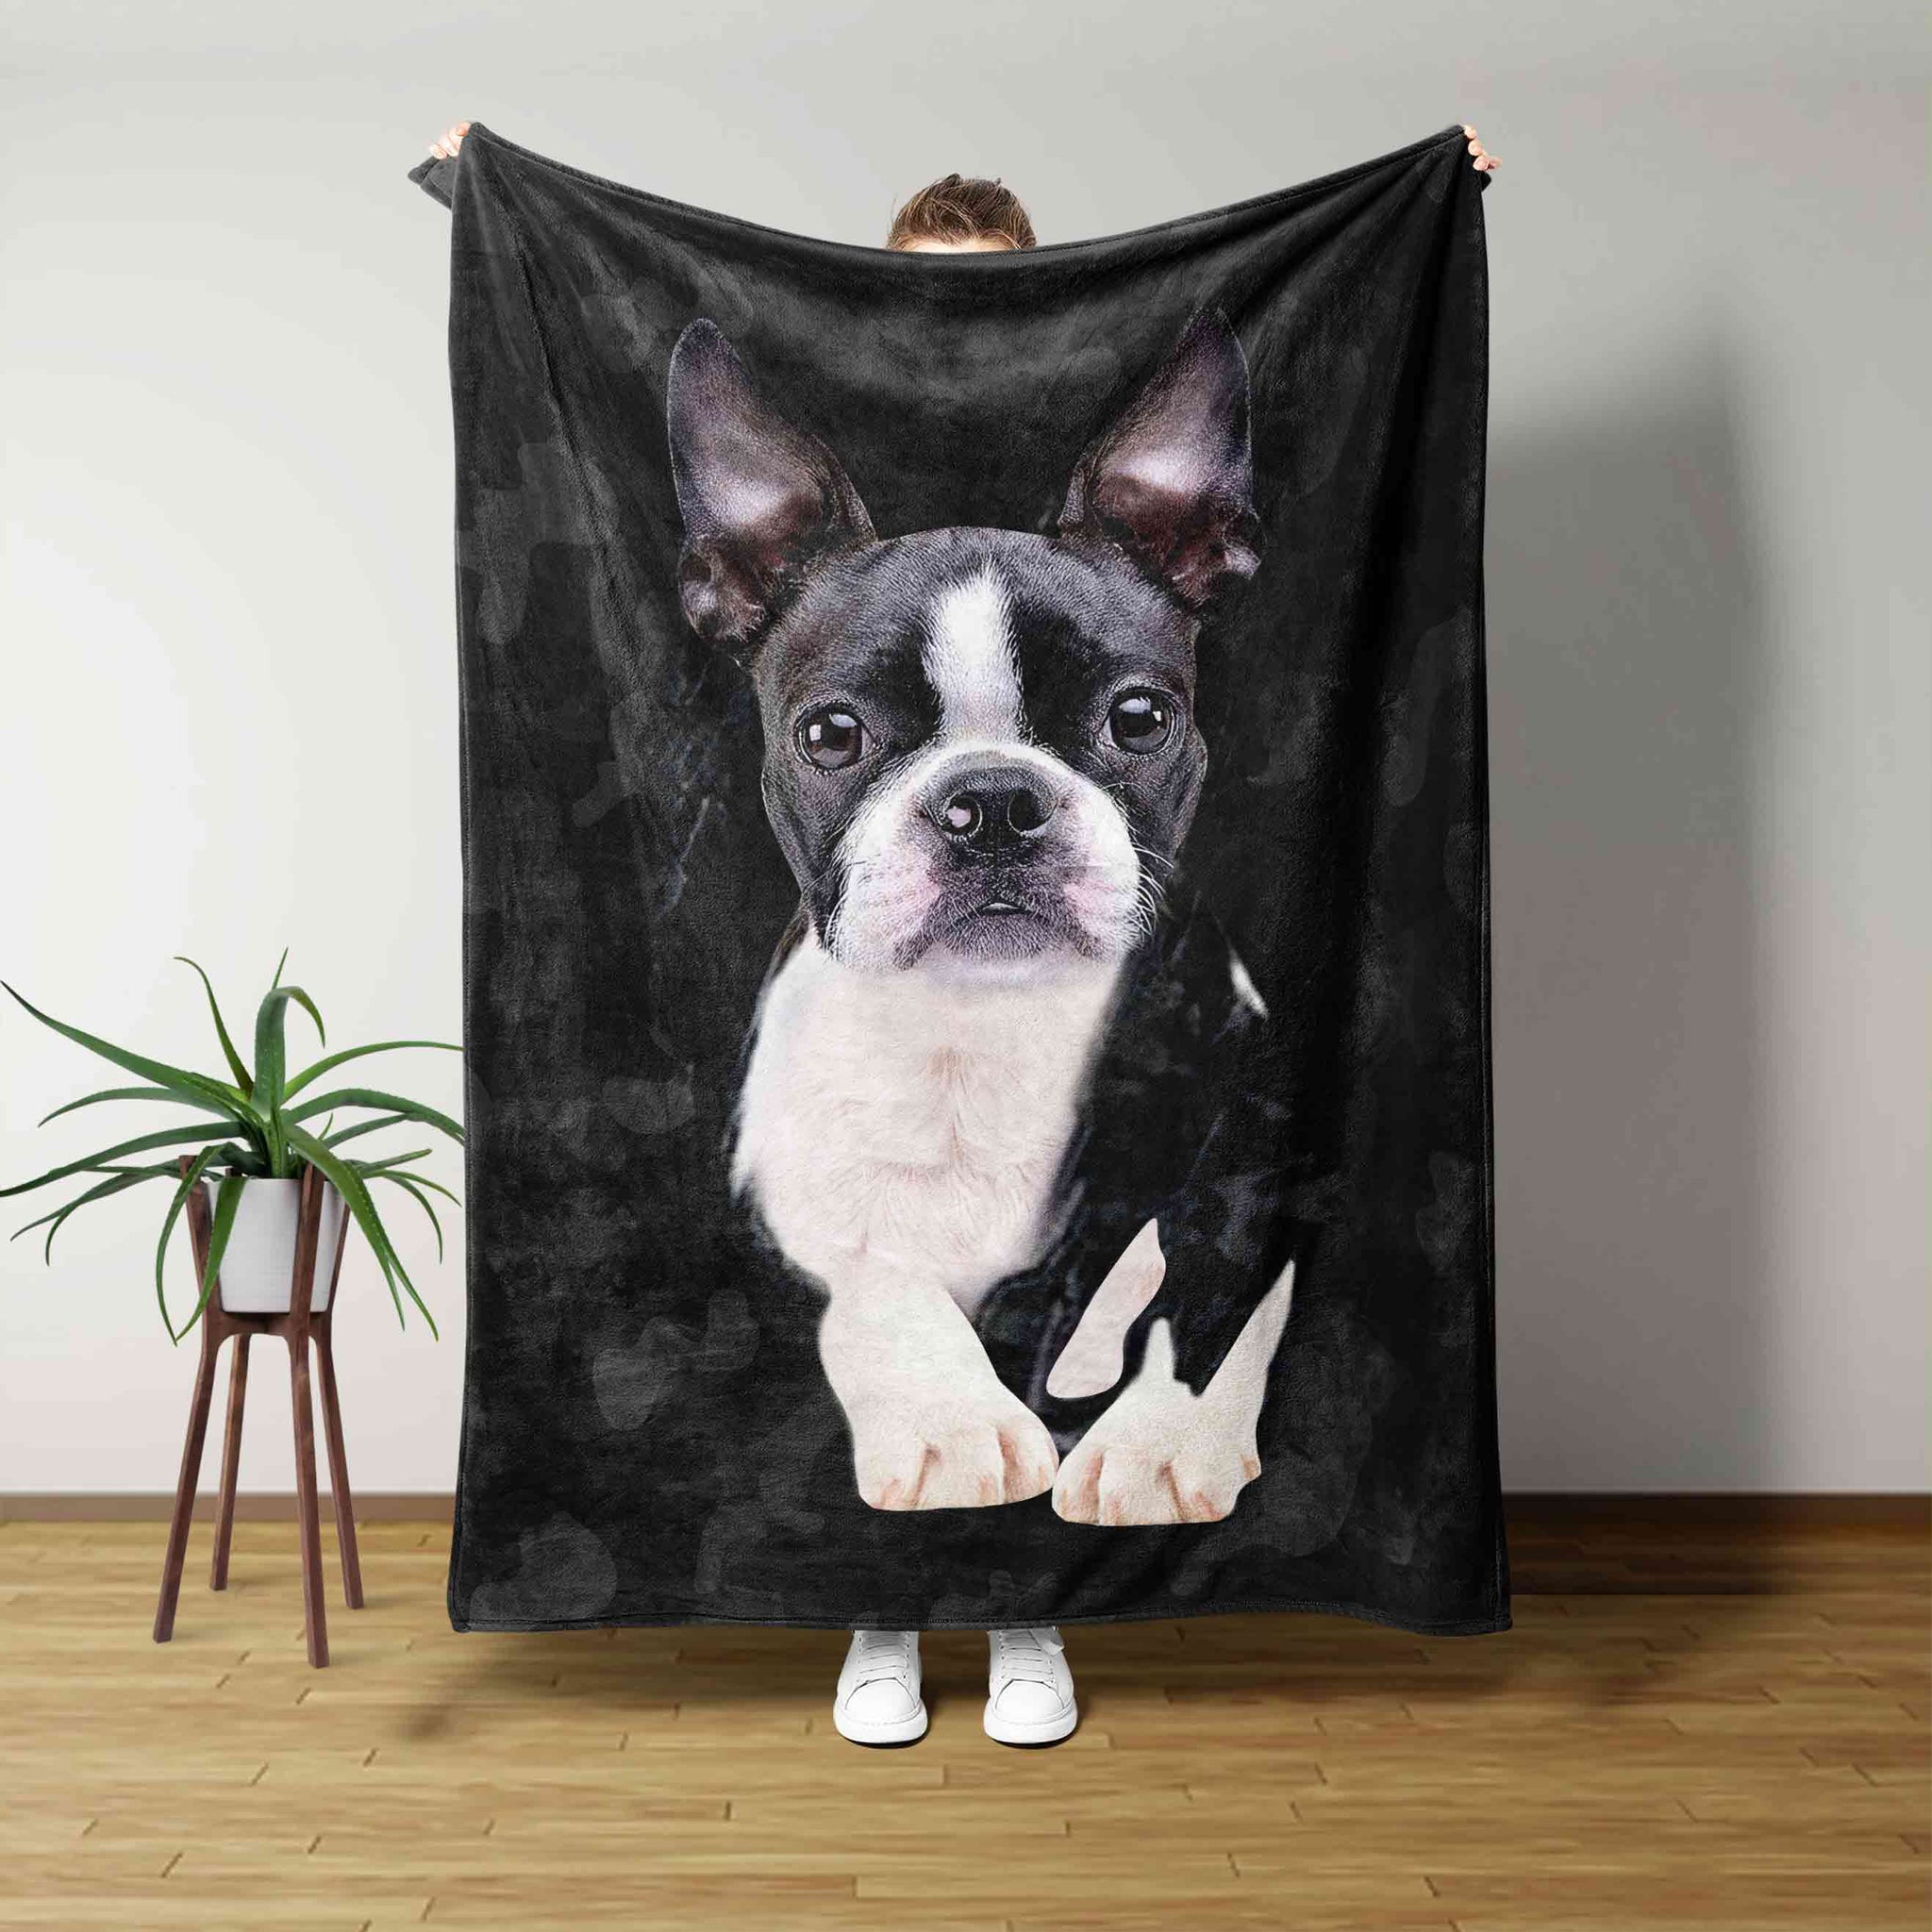 Personalized Image Blanket, Boston Terrie Dog Blanket, Dog Blanket, Family Blanket, Gift Blanket